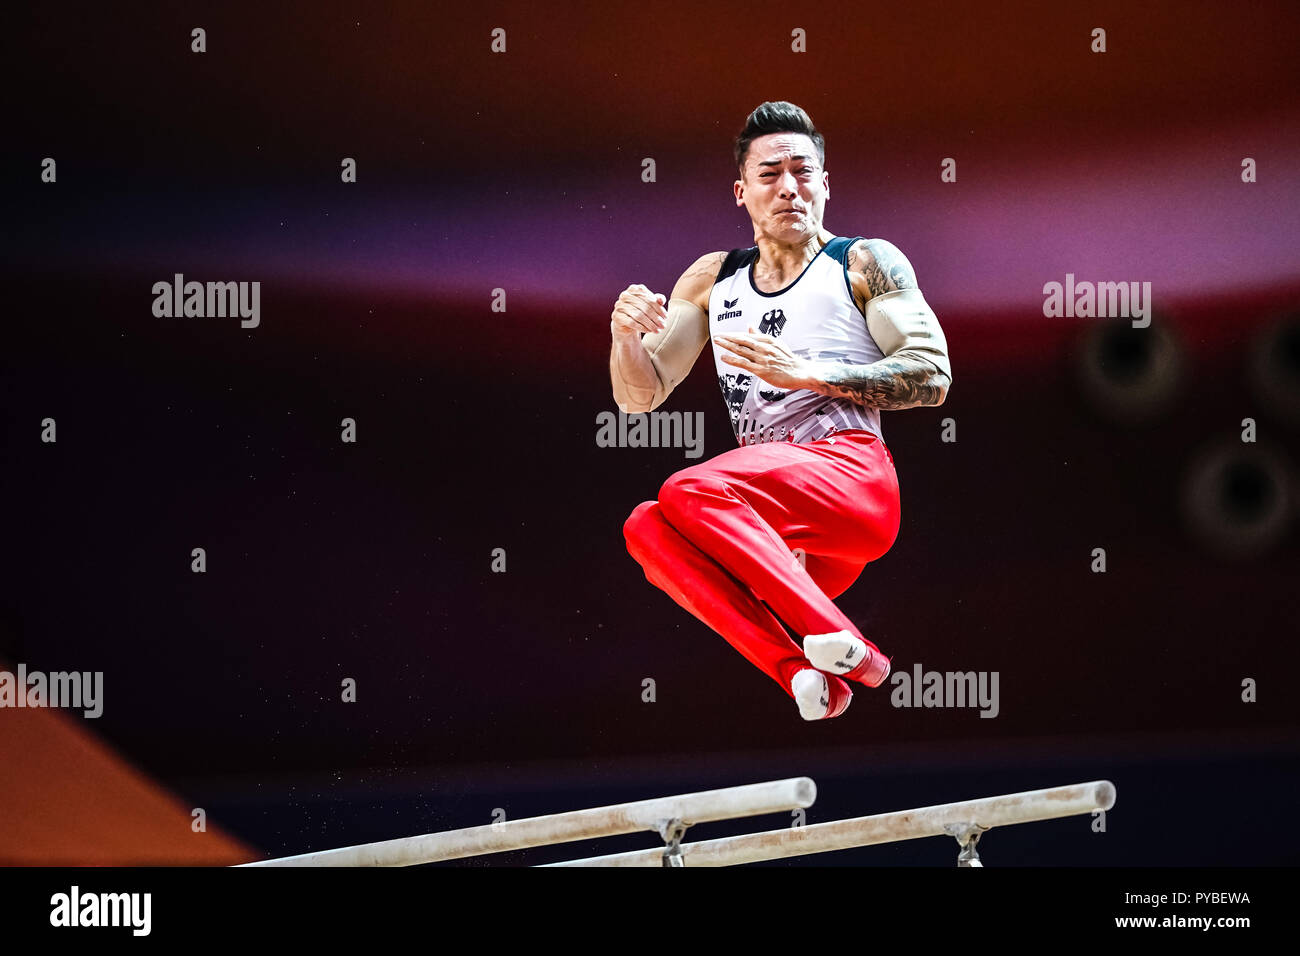 Doha, Qatar. 26th Oct 2018. October 26, 2018: Marcel Nguyen of Germany during Parallel Bars qualification at the Aspire Dome in Doha, Qatar, Artistic FIG Gymnastics World Championships. Ulrik Pedersen/CSM Credit: Cal Sport Media/Alamy Live News Stock Photo